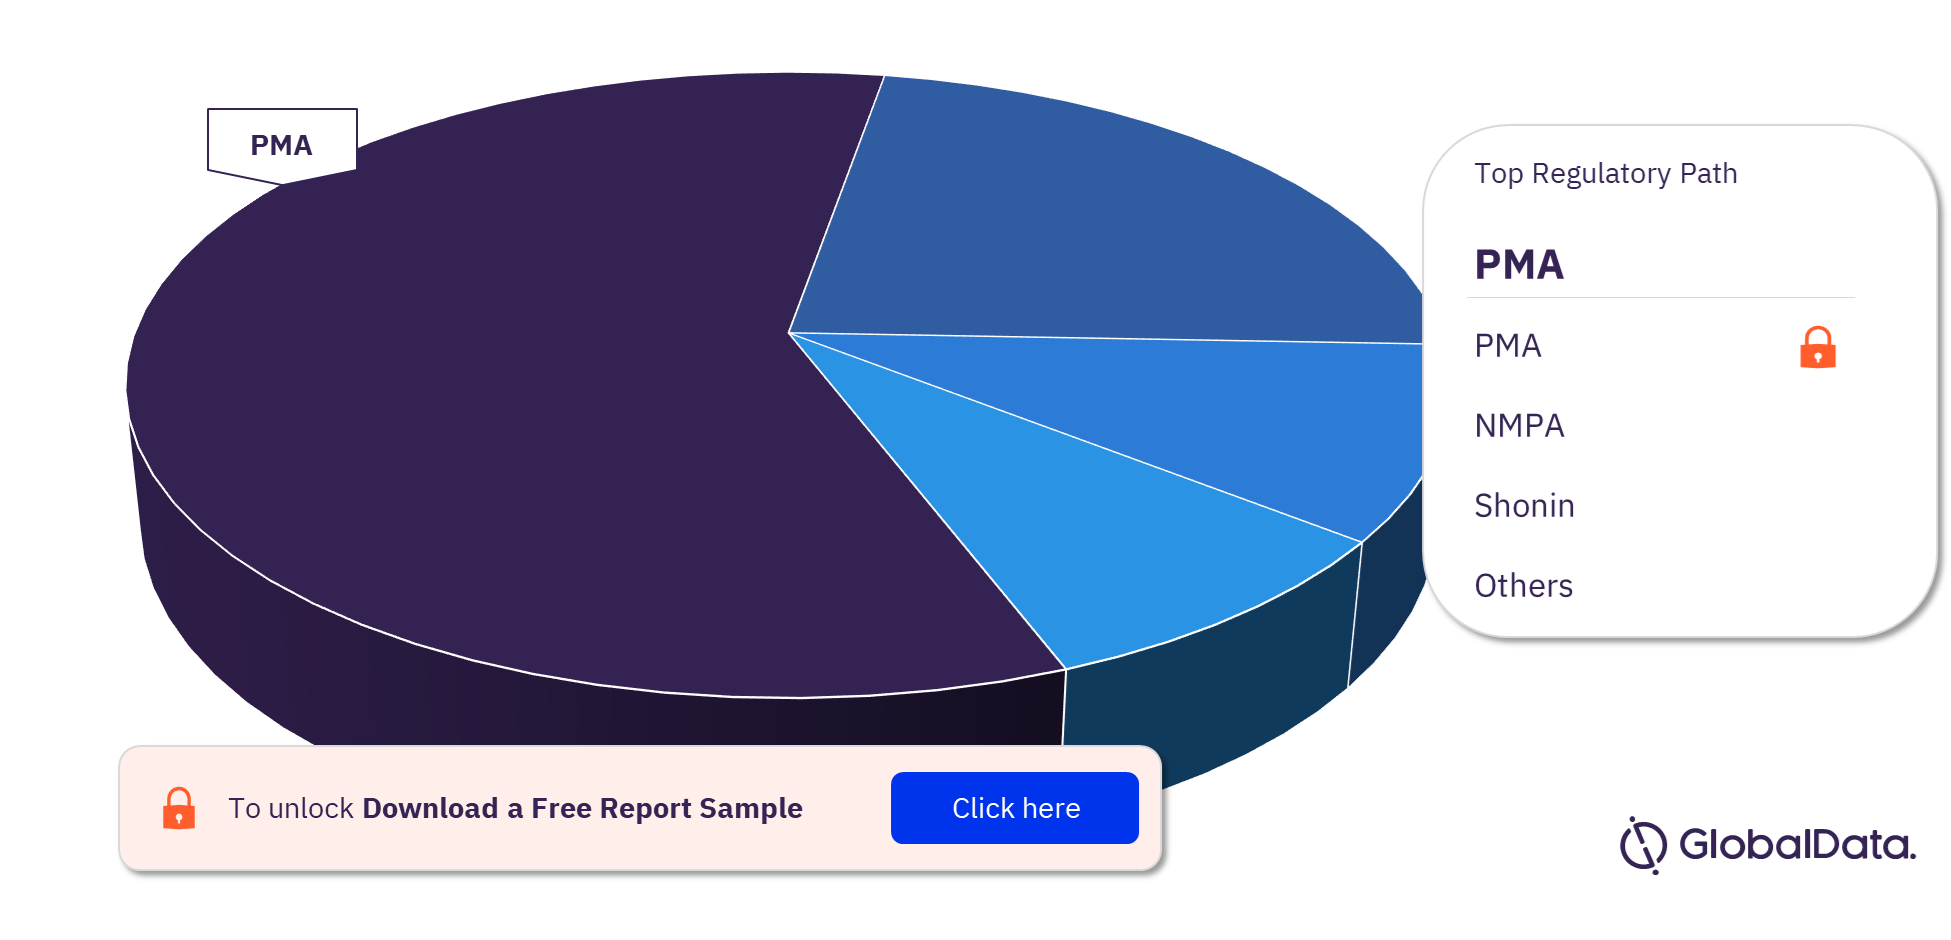 Thoracic Aortic Stent Grafts Pipeline Market Analysis, by Regulatory Paths, 2023 (%)